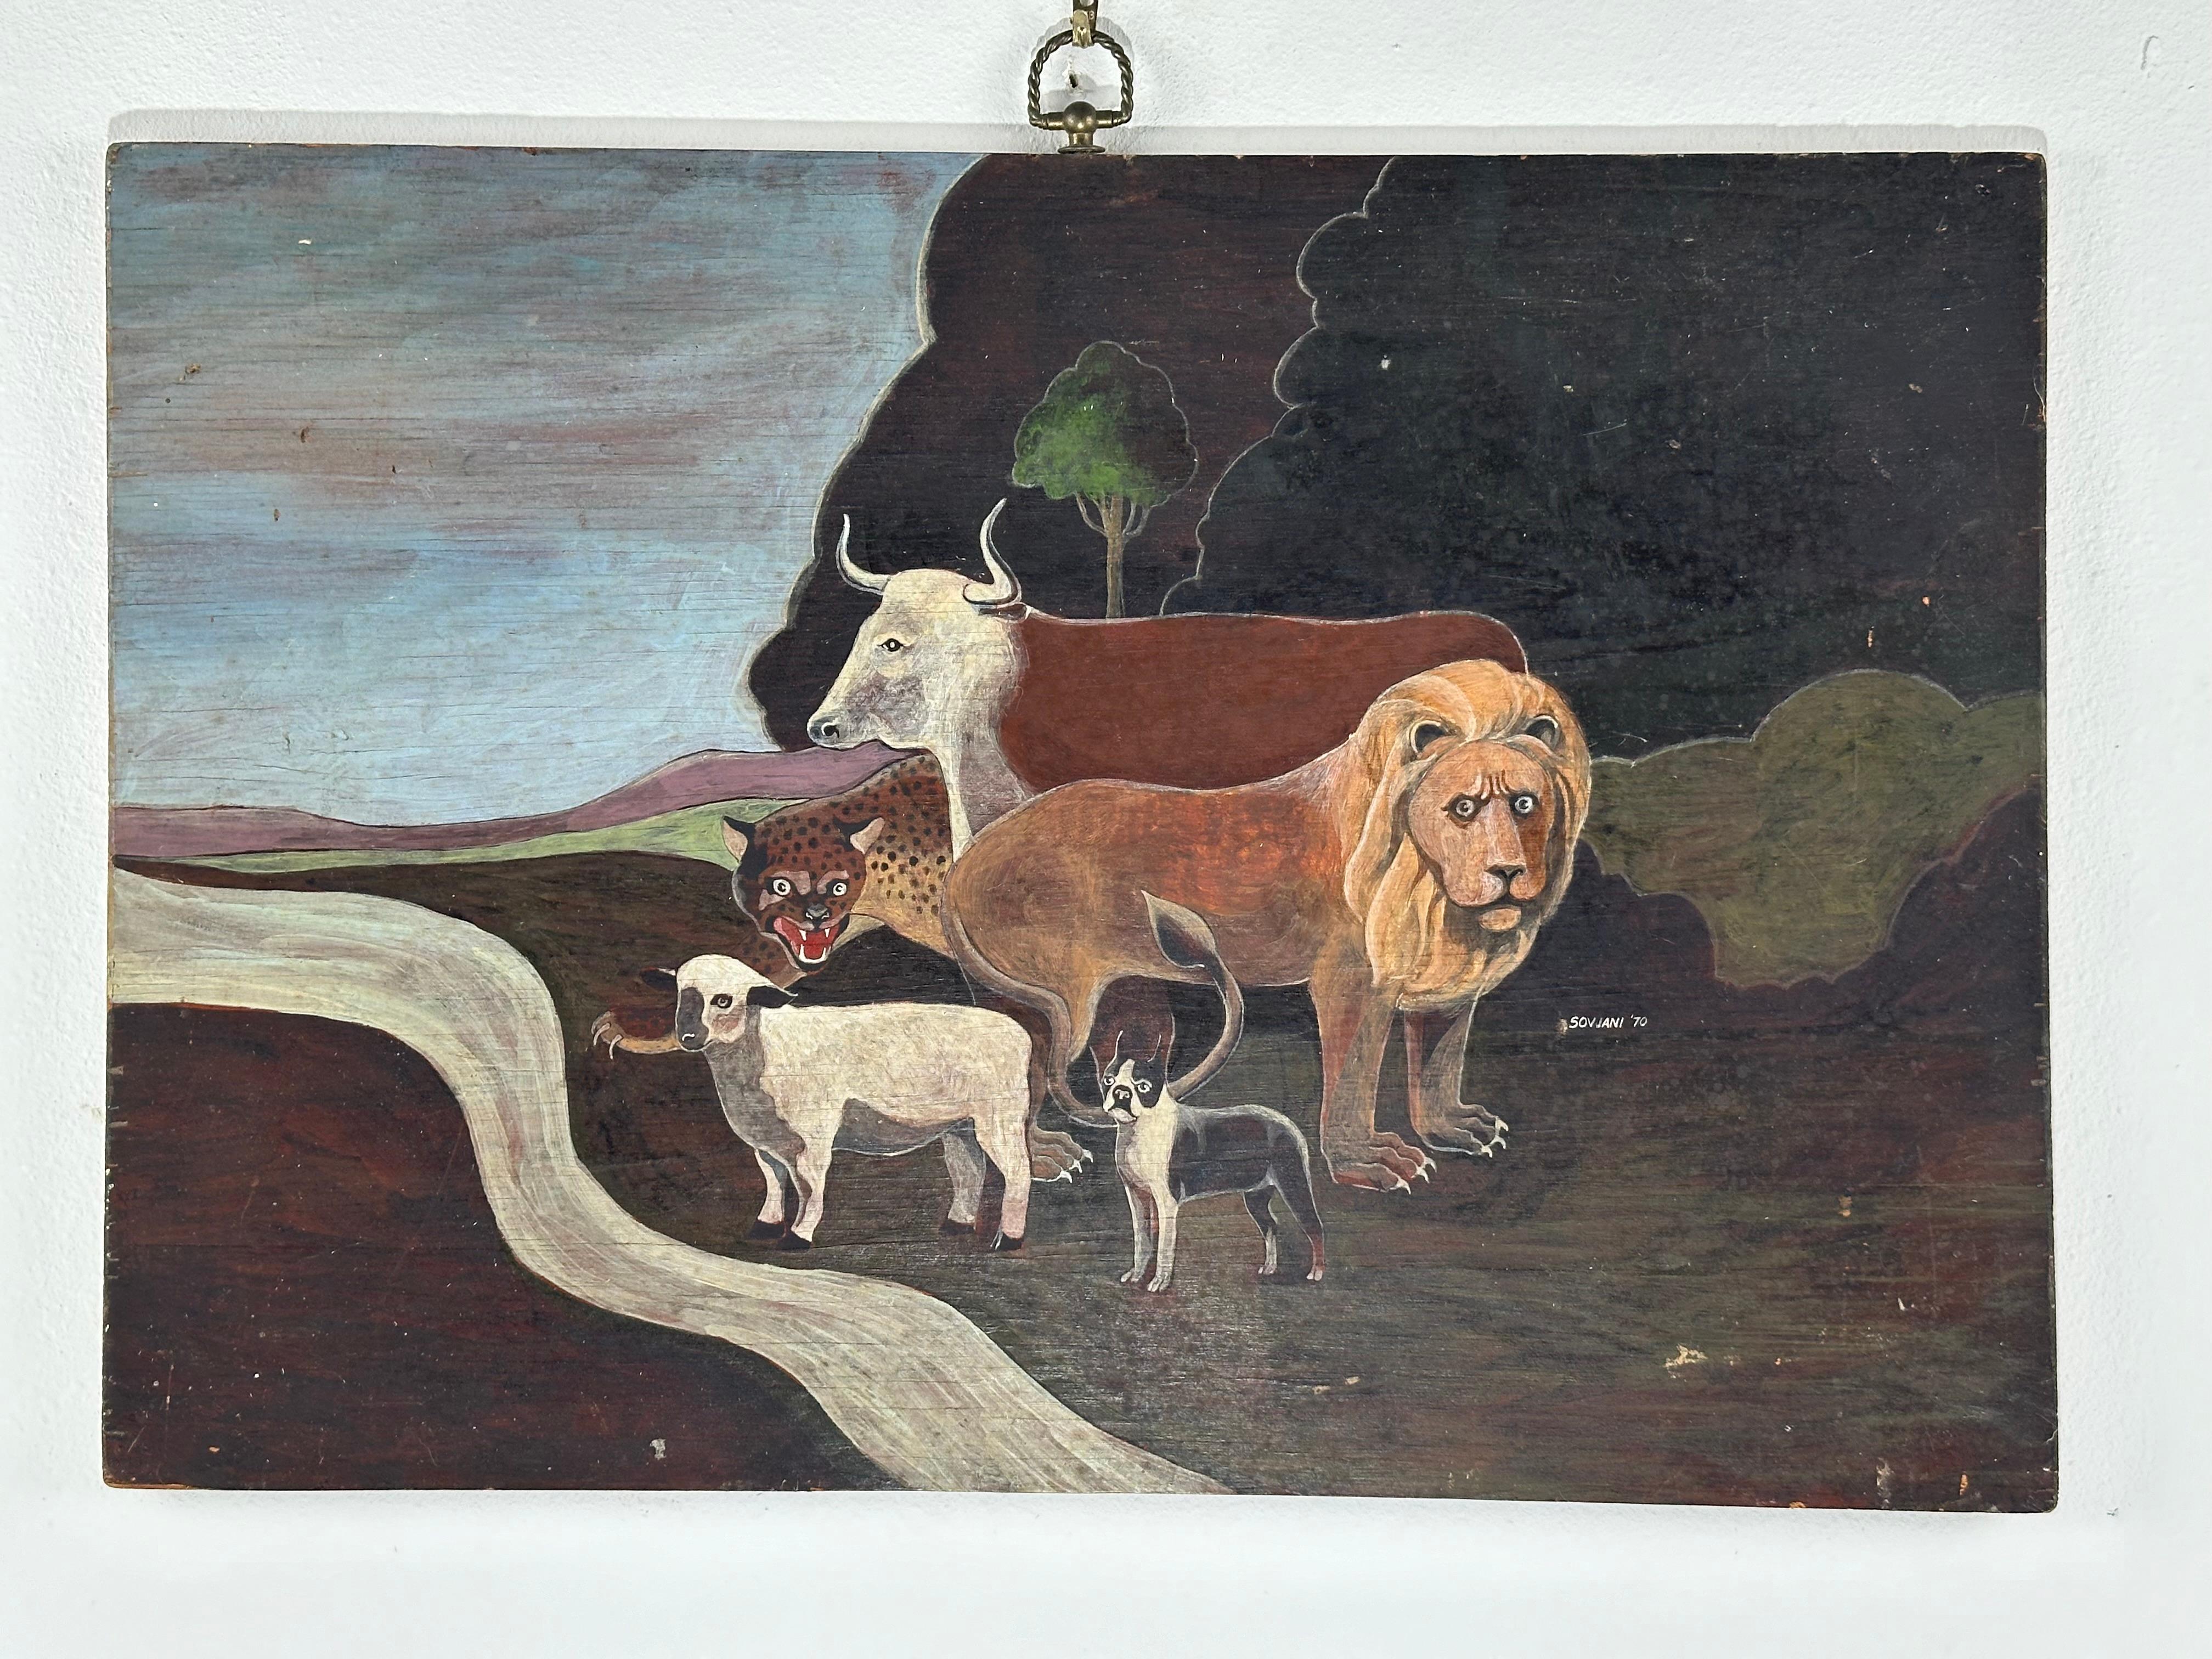 Peaceable Kingdom with Boston Terrier surrealist painting